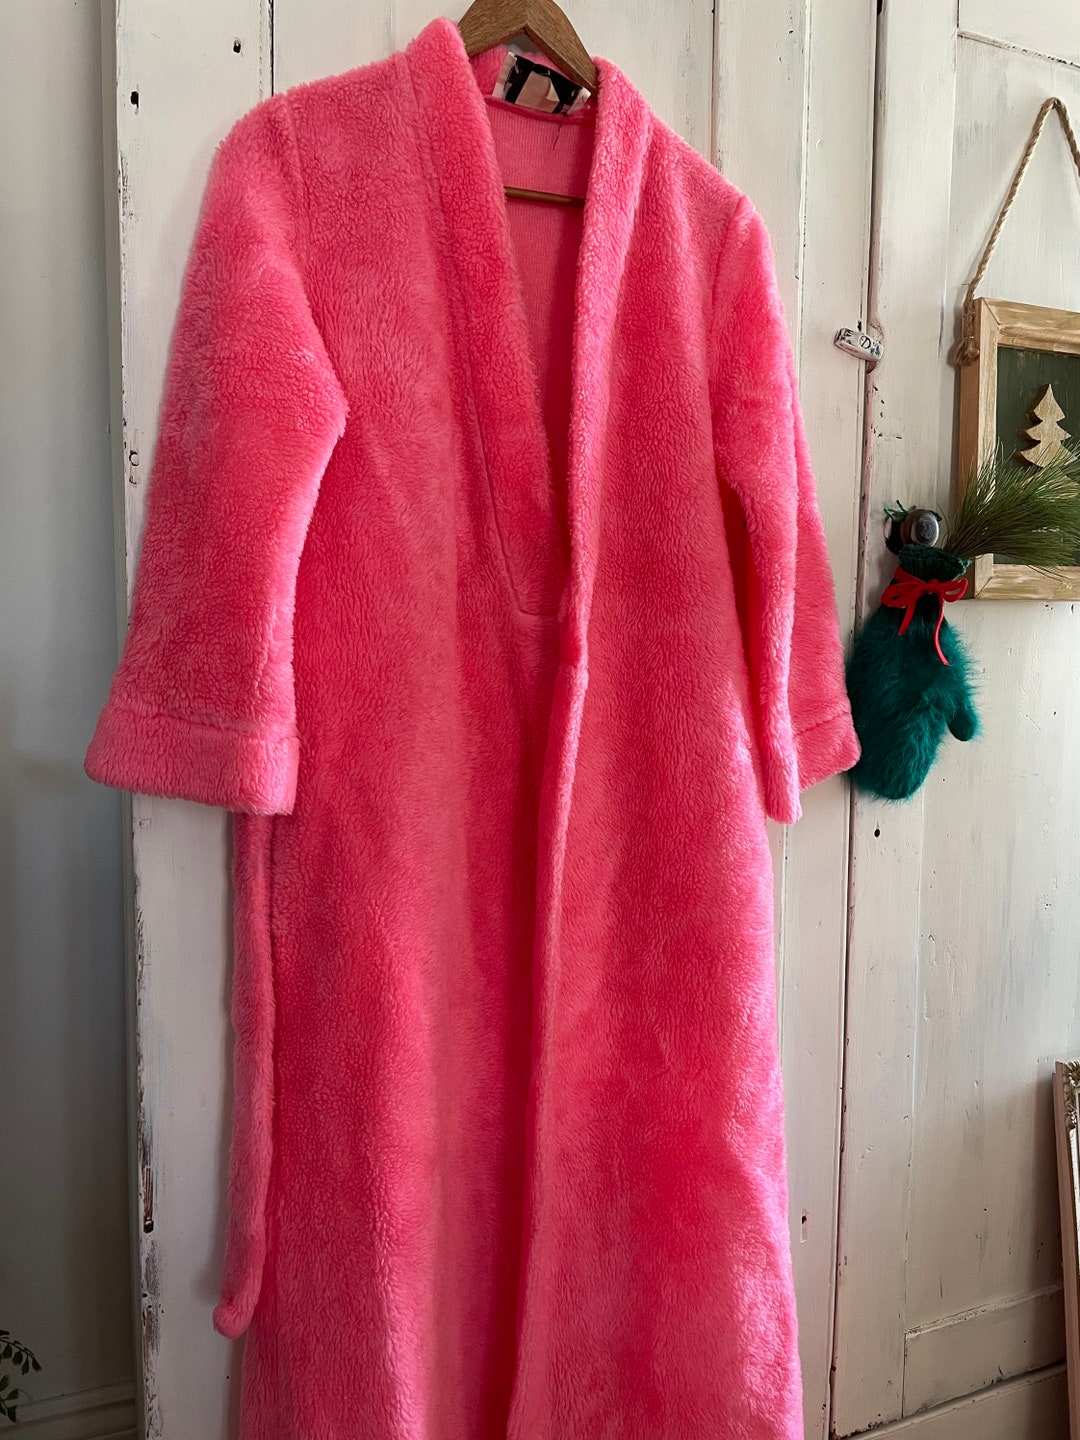 Vintage Sears Dressing Gown - Etsy